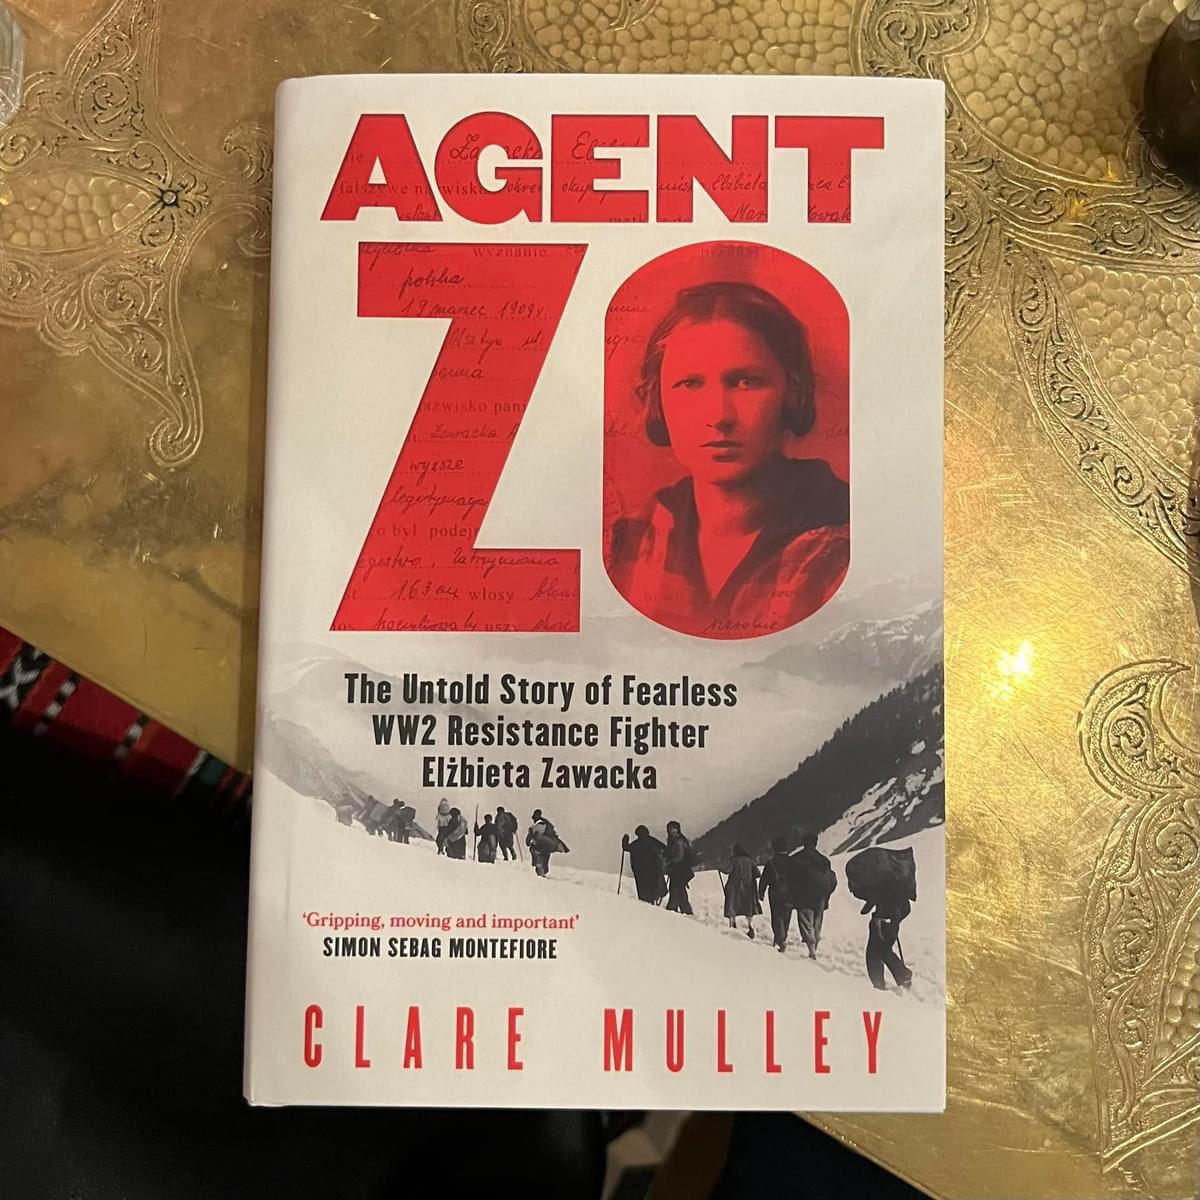 Kind man in the post office took this of me - overexcited - to see #AgentZo reviewed in today’s @FT! With ‘controlled, unsentimental eloquence & style, it offers unique & original insights into the vital if unsung role of women’ in #WW2 resistance & that Zo ‘richly deserved’.